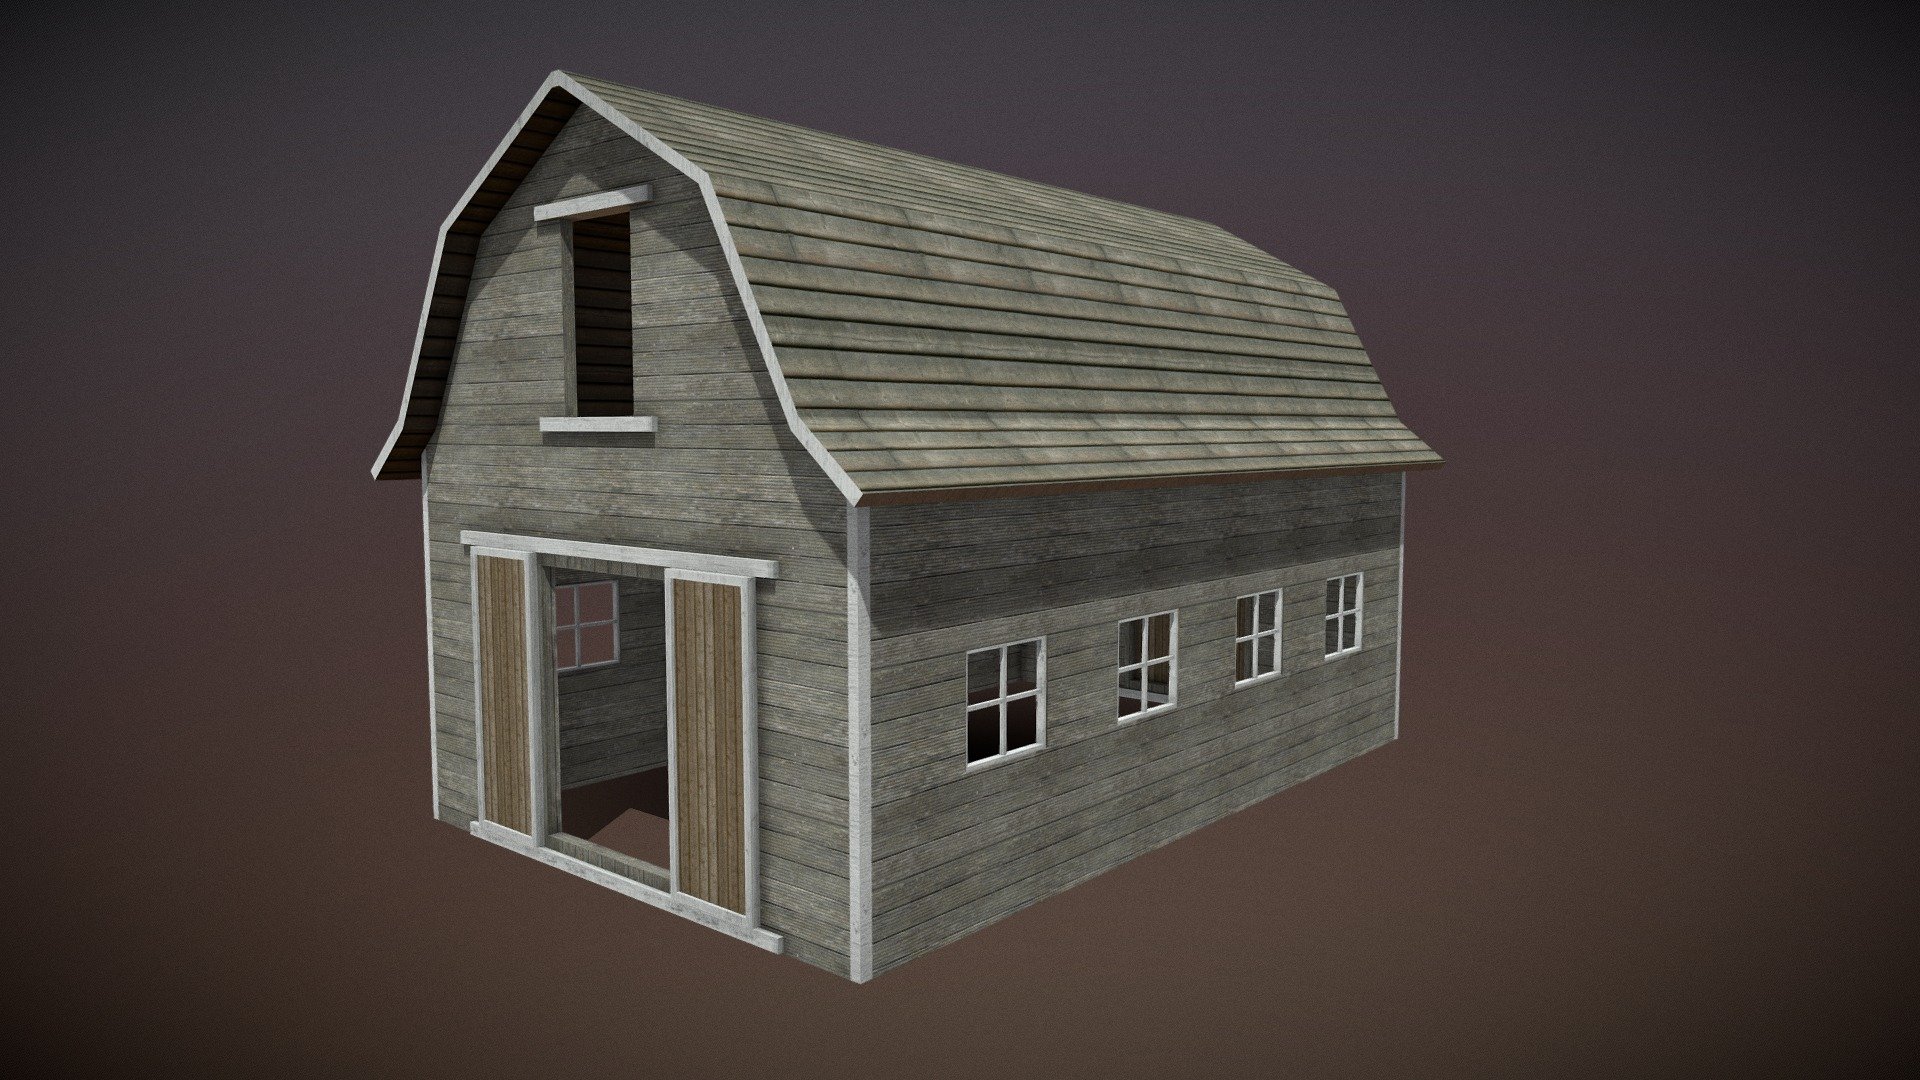 A 20th century Western era Barn. Works great in any modern game engines or for rendering purposes. The model comes with two texture and material setups. Both the interior and exterior are textured.

Available in: blend, fbx, 3ds, obj, mtl and UnityPackage.

Textures are in 4096x4096 PNG format:




Diffuse/Albedo Texture

Normal Map

Ambient Occlusion

Unity Package includes easy to use drag and drop prefabs.

Materials are Native to Blender 2.79 (Packed textures) ,Files types have been exported from Blender

For any help or inquiries please message me directly on Sketchfab or on my email: howardcoates95@gmail.com - Barn - Buy Royalty Free 3D model by HowardCoates 3d model